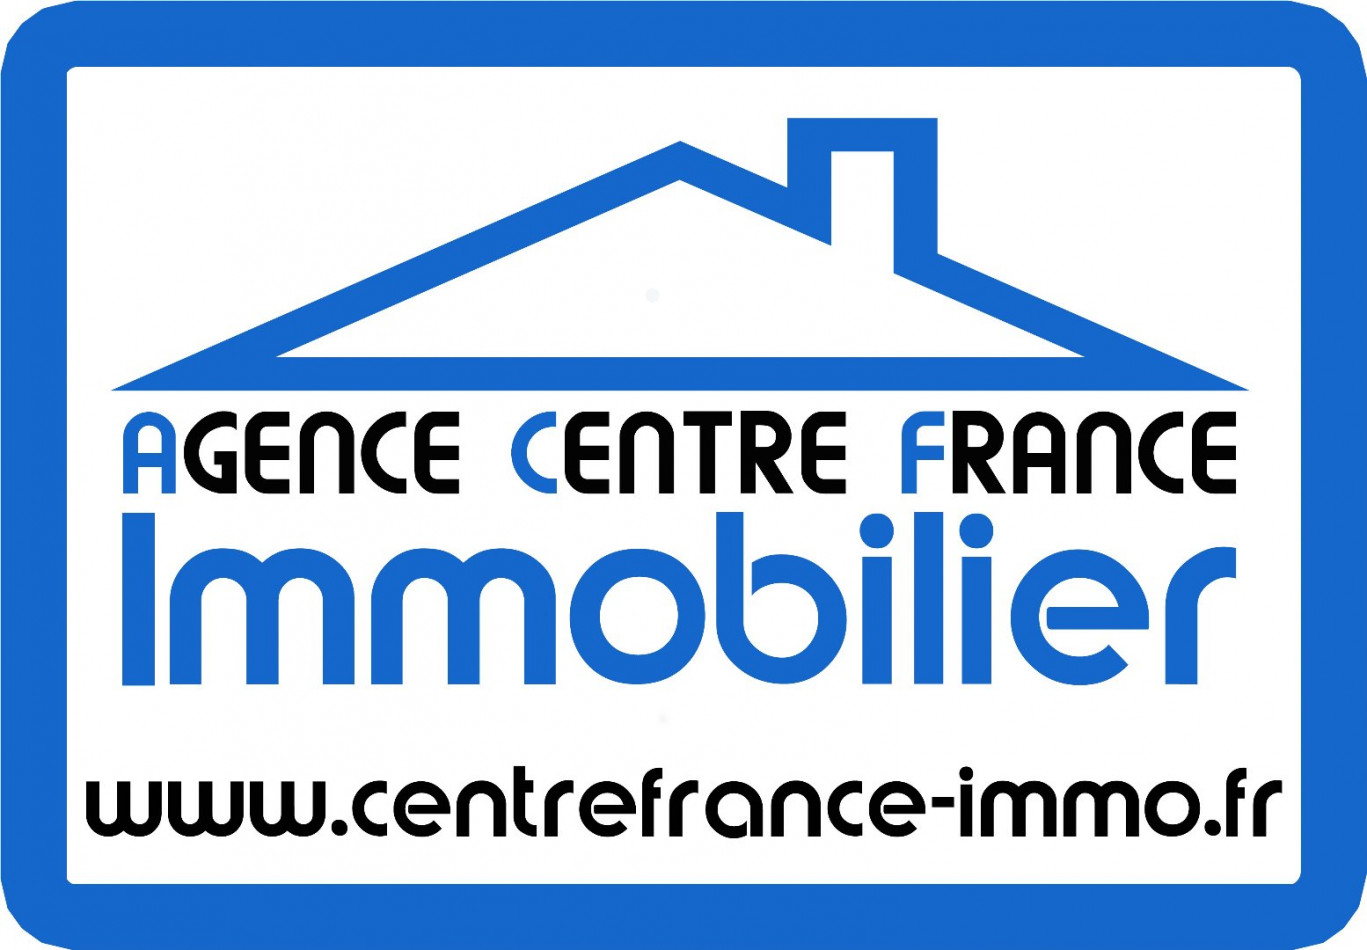  vendre Local commercial Bourges